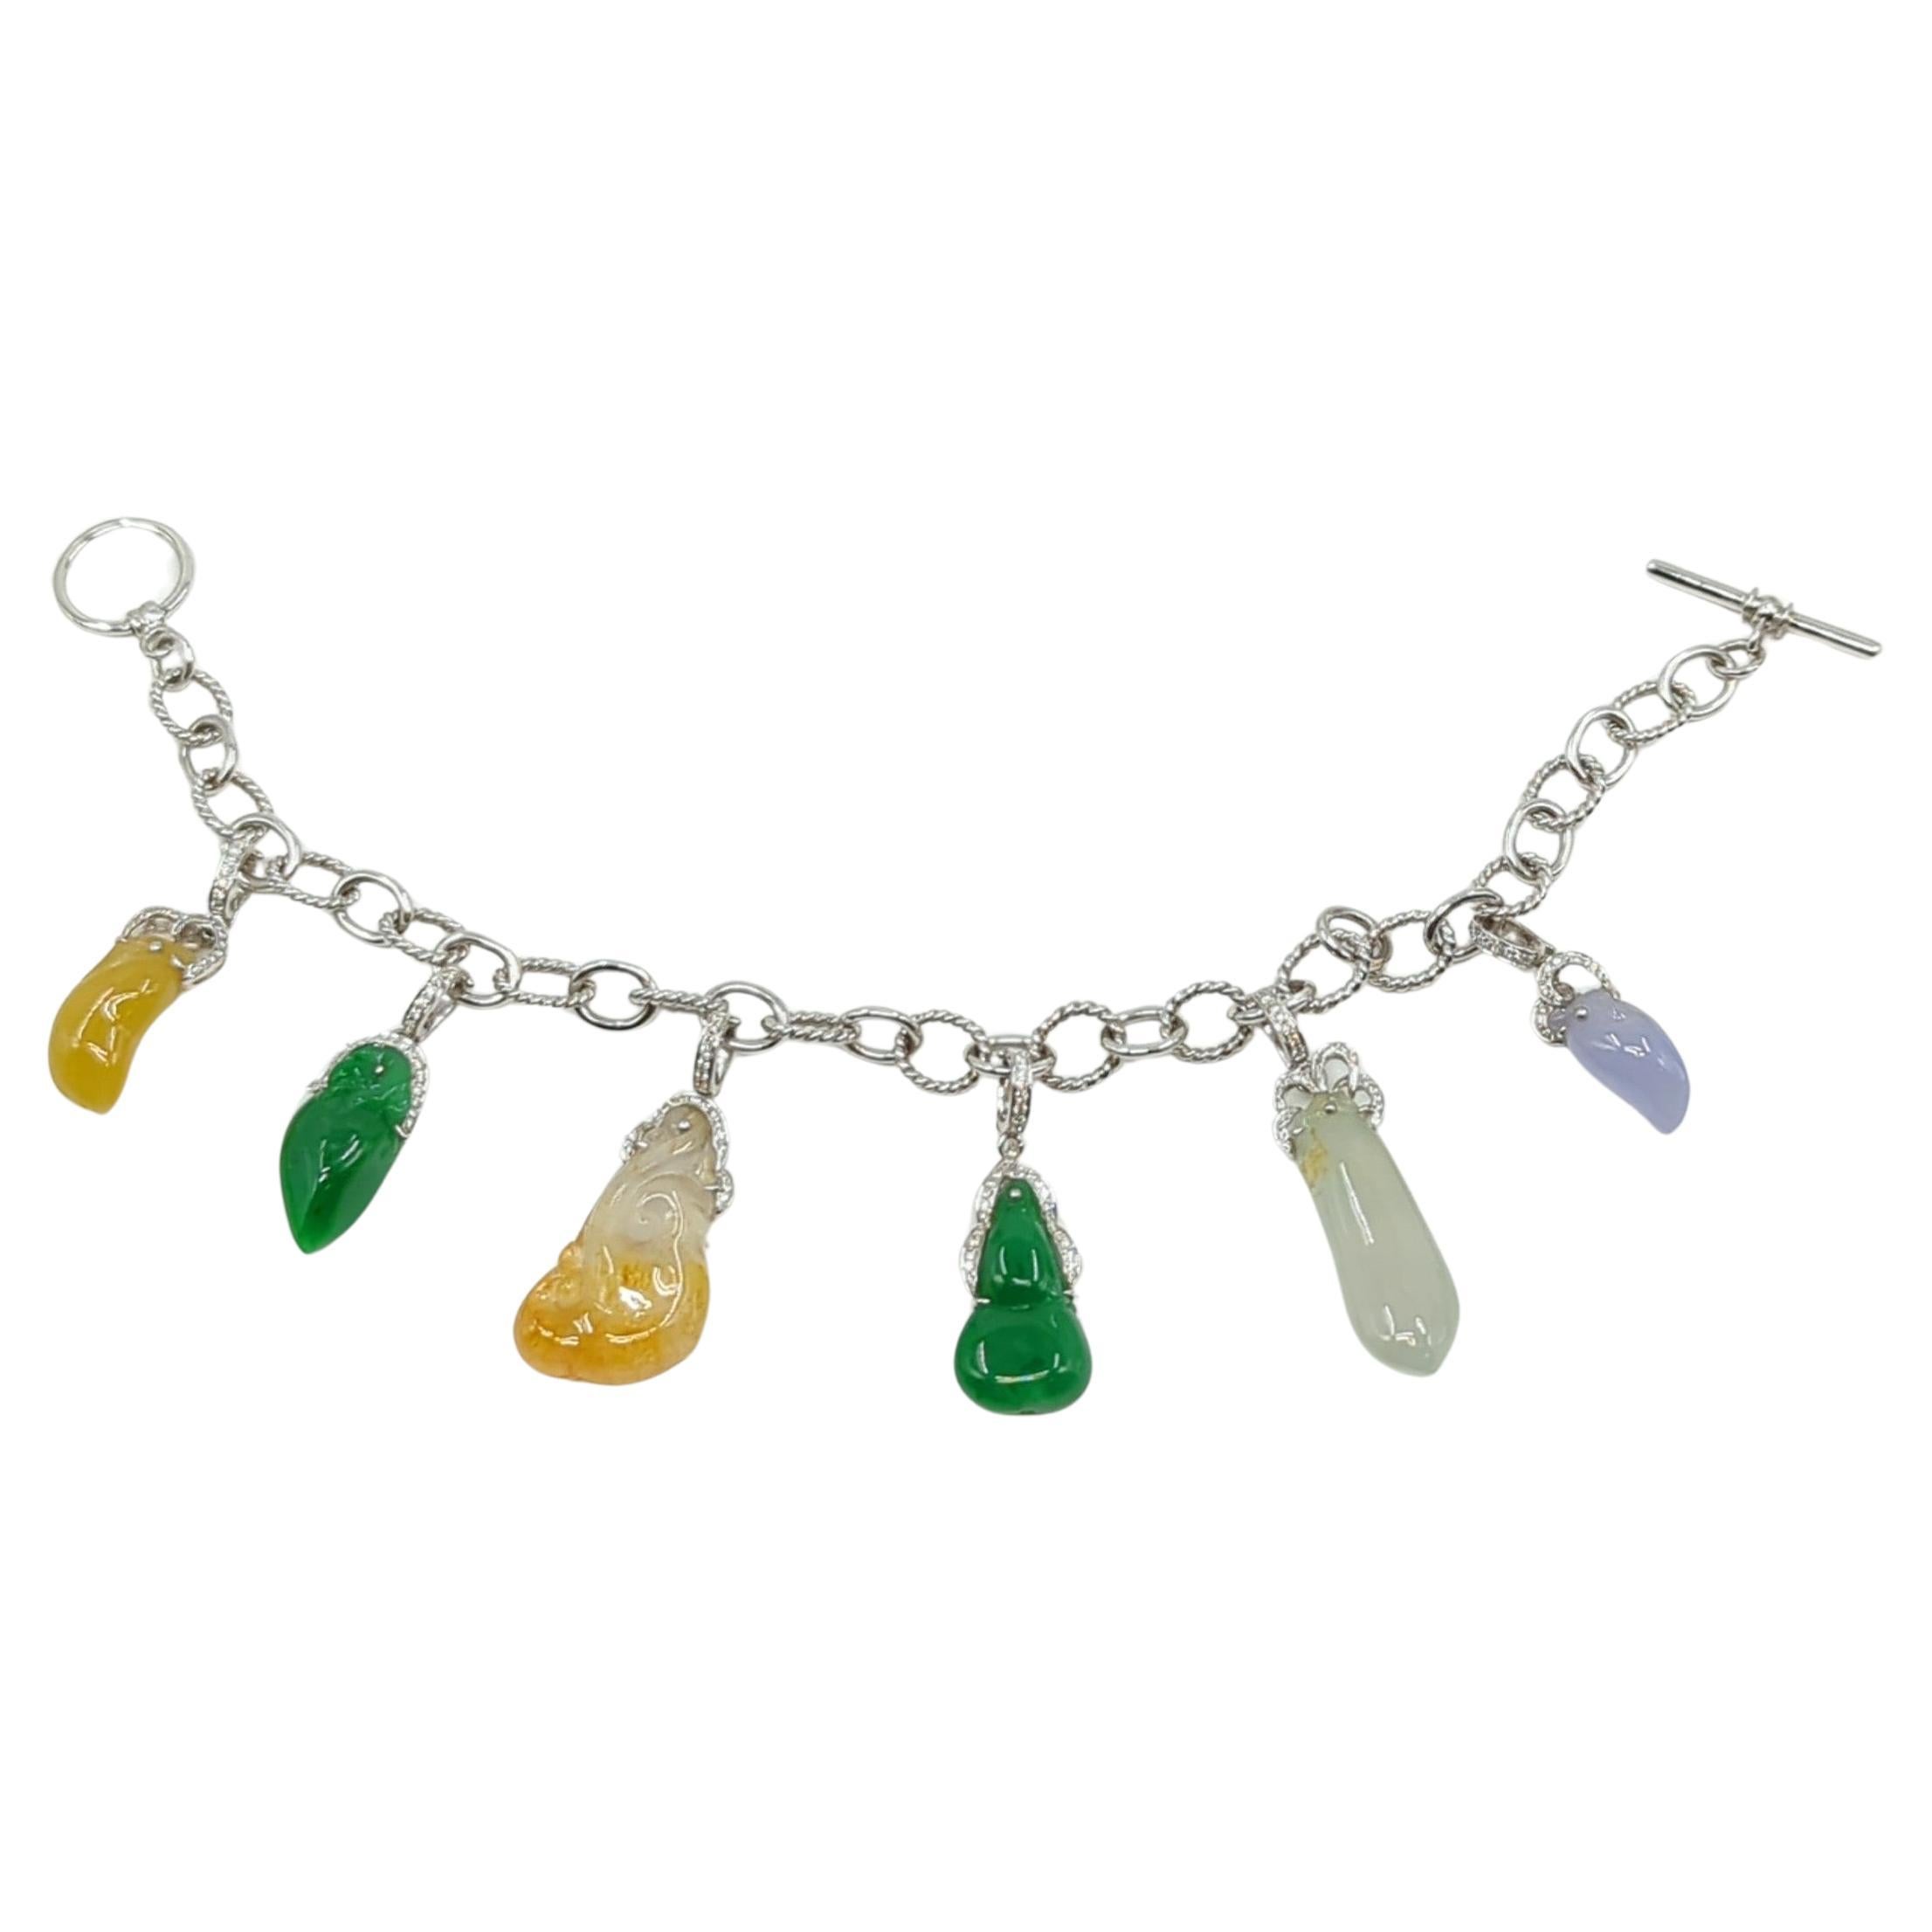 This 18k white gold ladies' jadeite charms bracelet is a rare and versatile masterpiece, weighing in at 35.32 grams. The bracelet showcases six meticulously handcrafted A-grade jadeite charms, each in a unique motif and color palette—two in rich